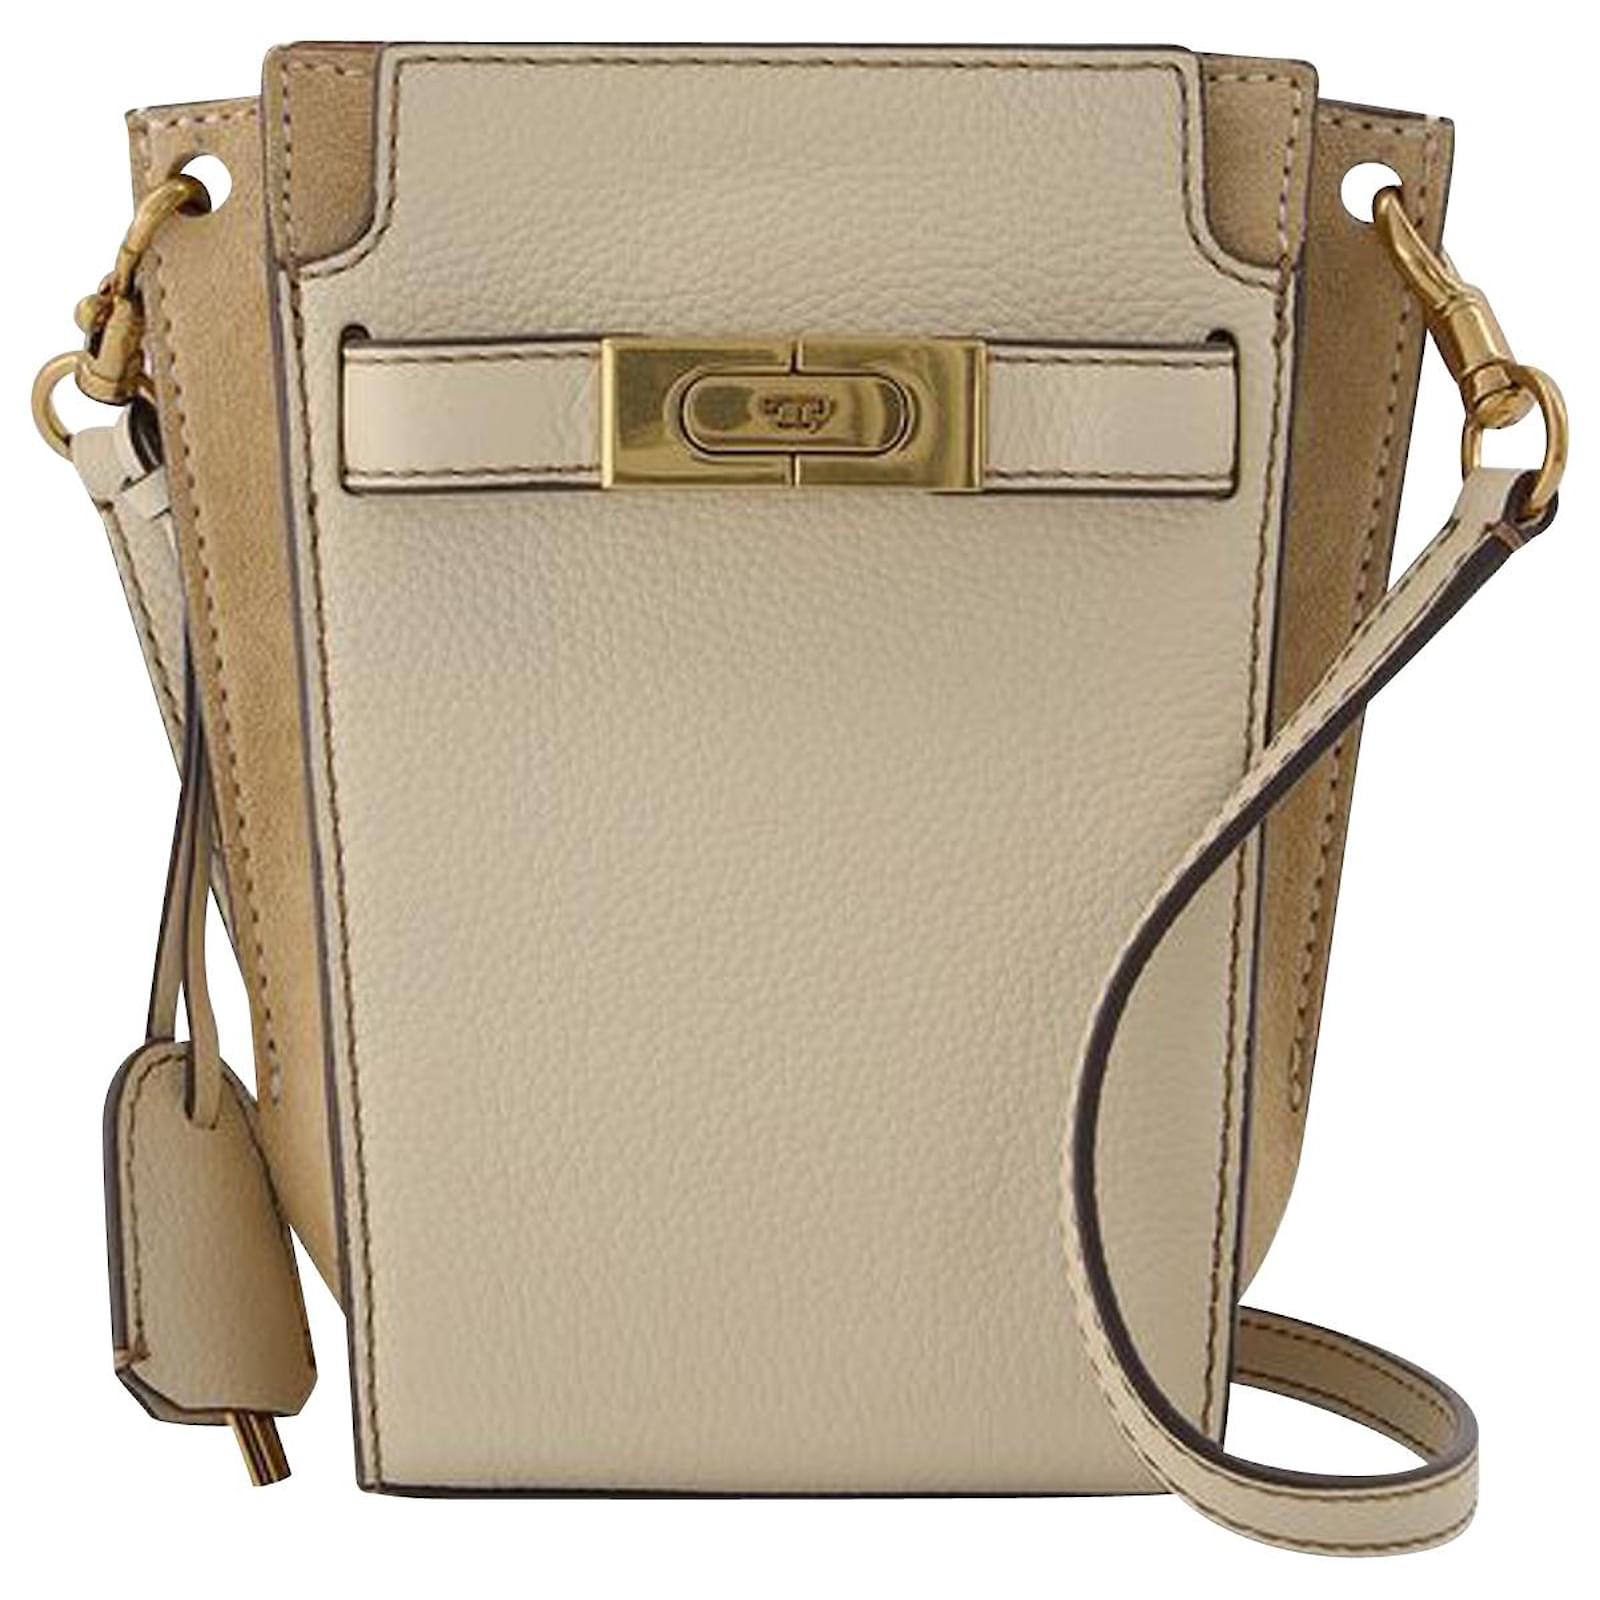 TORY BURCH Cream Leather Tote Shoulder Bag 